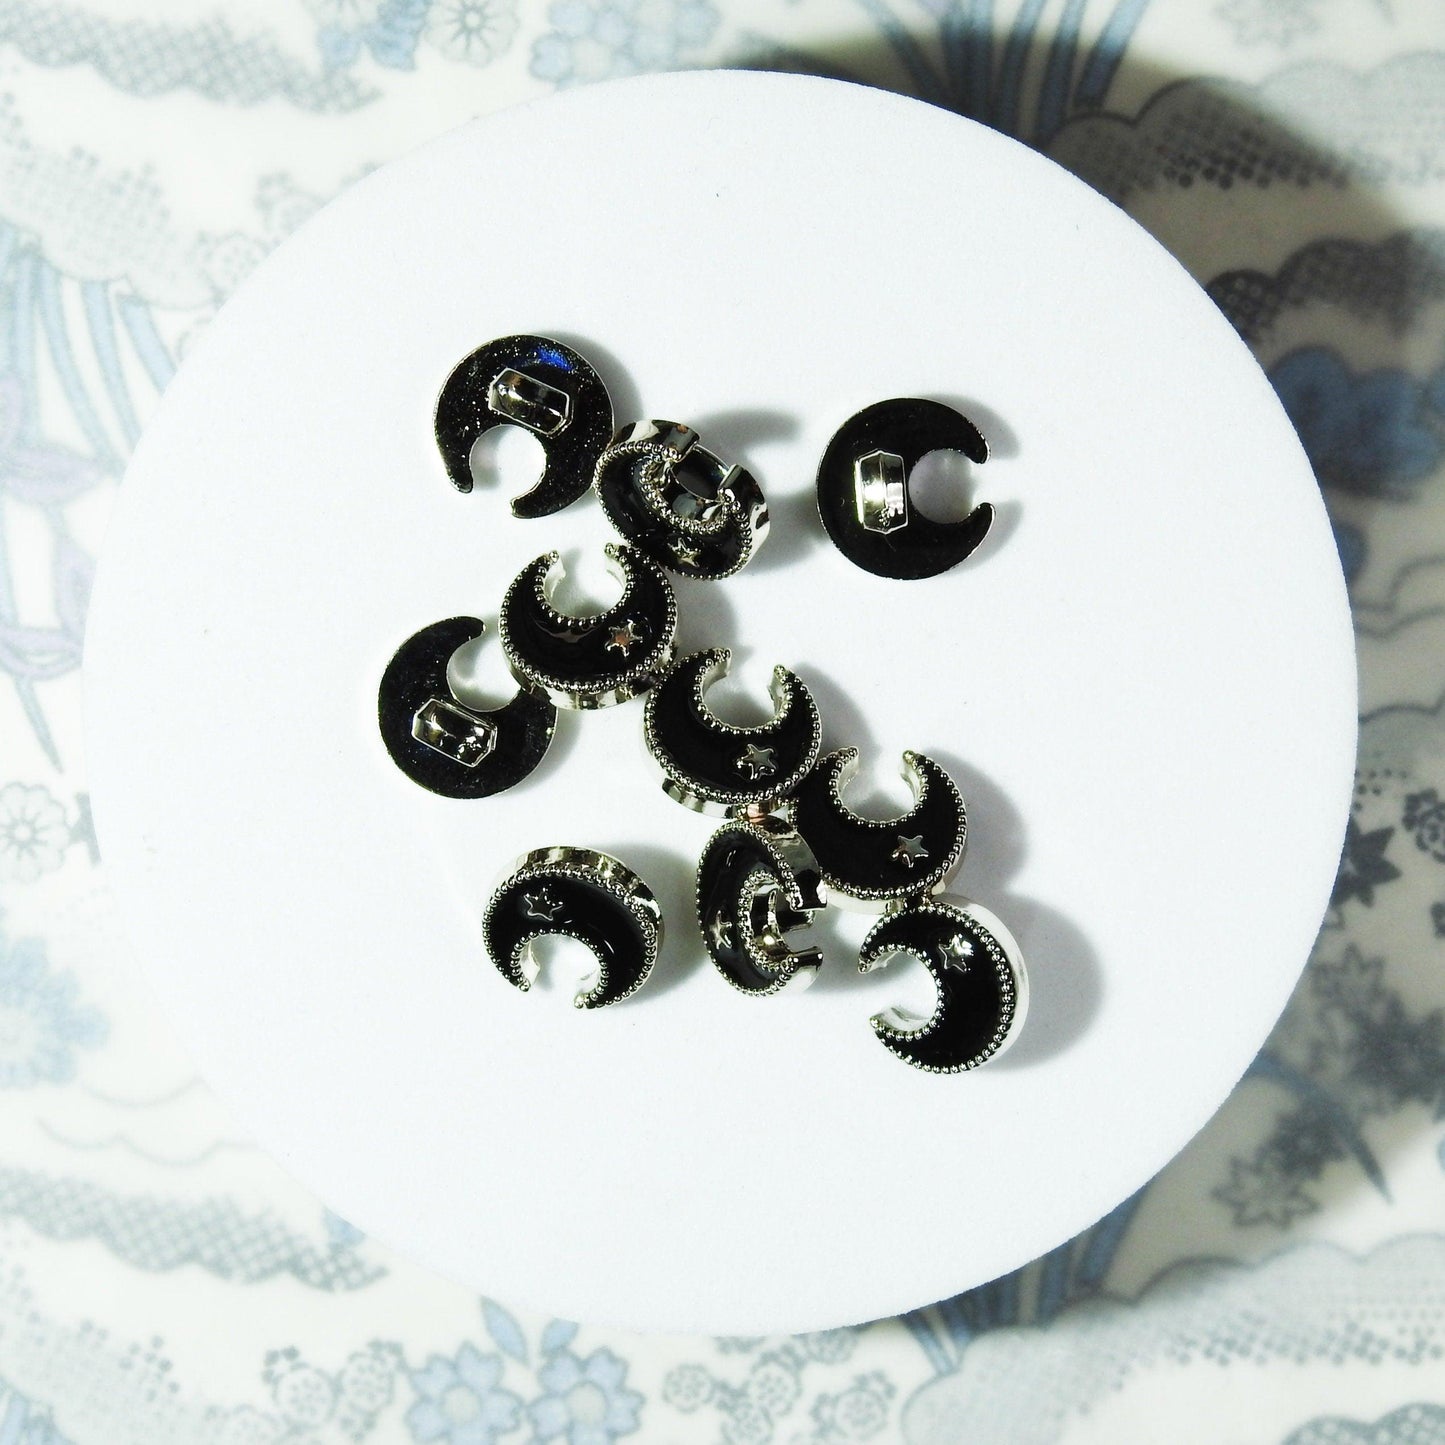 Moon-shaped buttons